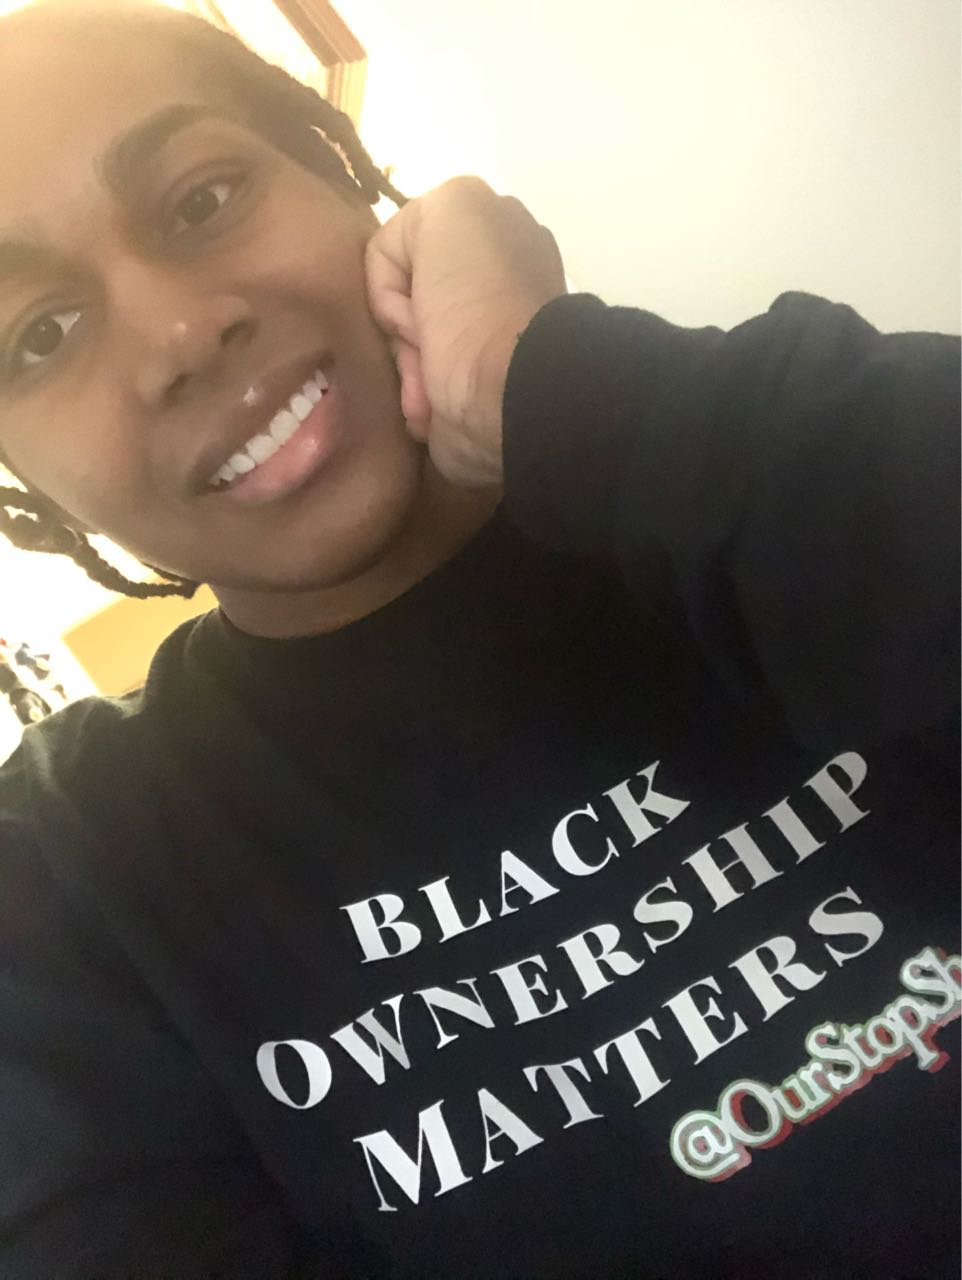 About the Black Ownership campaign on Bonfire 8